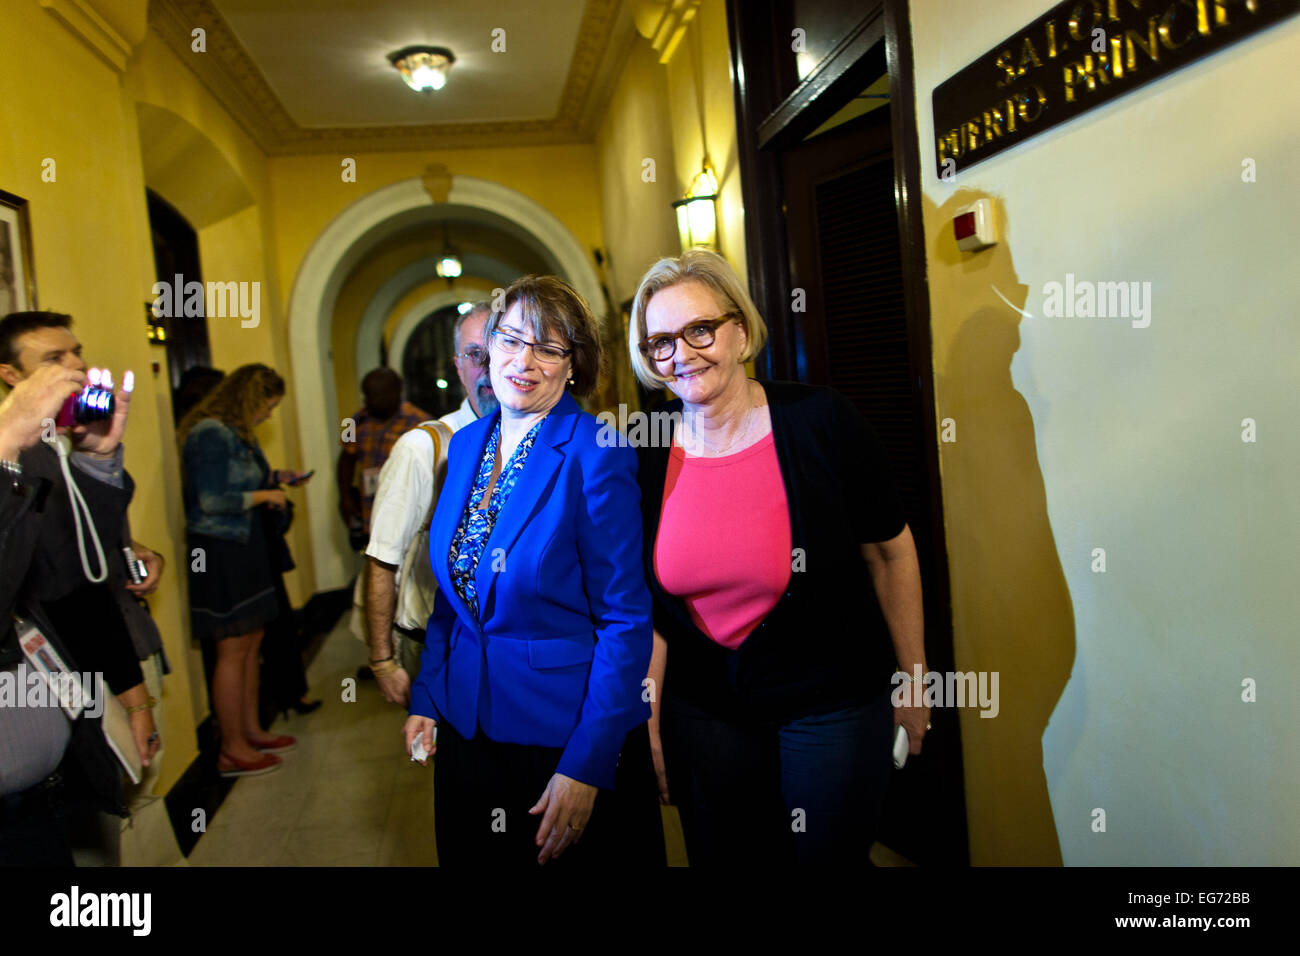 Havana, Cuba. 17th Feb, 2015. U.S. Senators Amy Klobuchar (L) and Claire McCaskill (R) leave after attending a press conference in Havana, Cuba, on Feb. 17, 2015. The United States and Cuba will hold a new round of talks on normalized ties here at the end of this month, the State Department confirmed on Tuesday. Credit:  Liu Bin/Xinhua/Alamy Live News Stock Photo